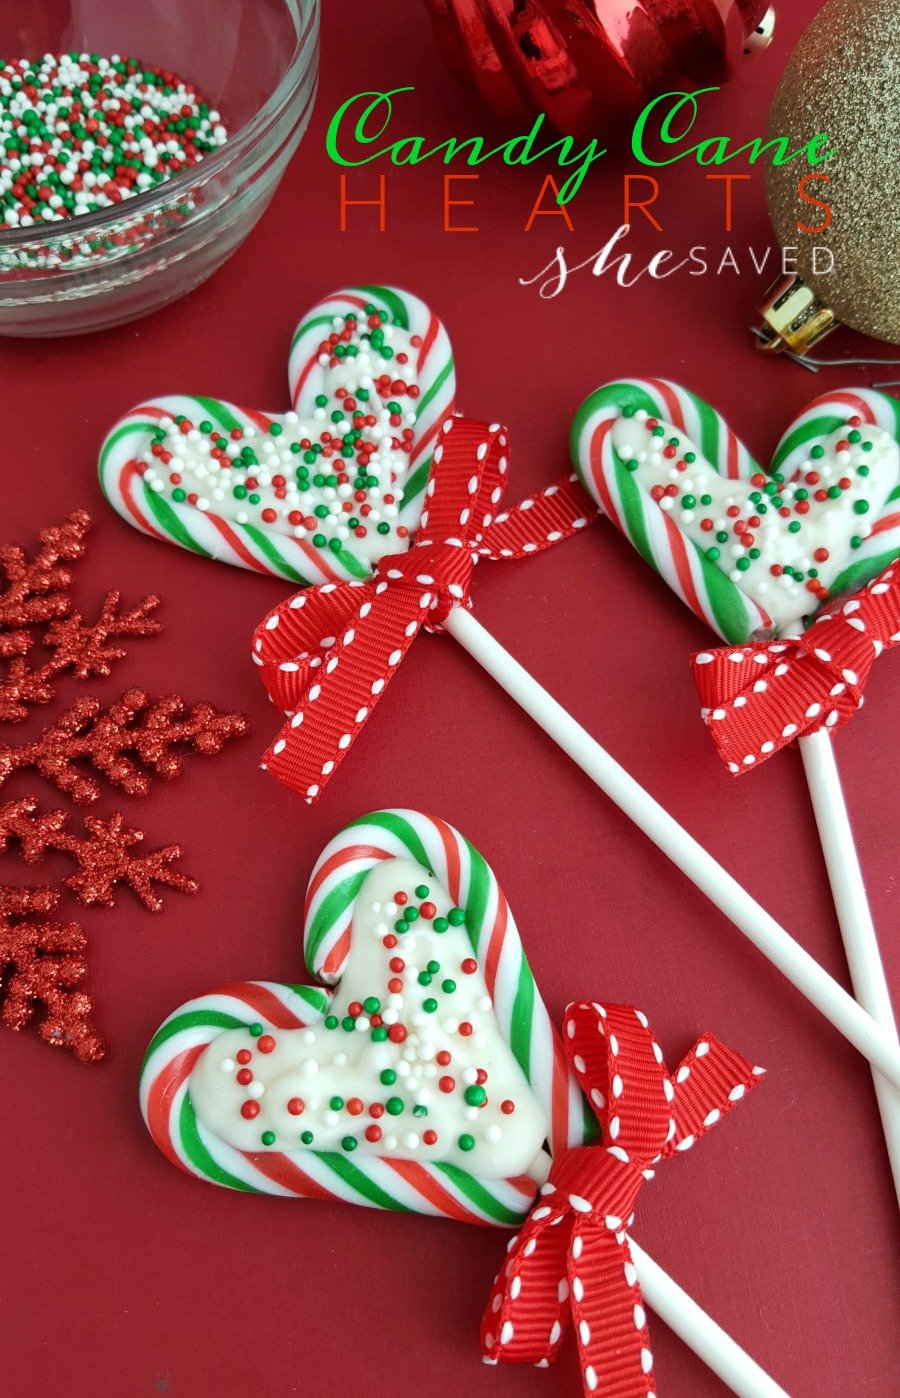 These Candy Cane Hearts are so easy and fun to make, and a great gift idea!